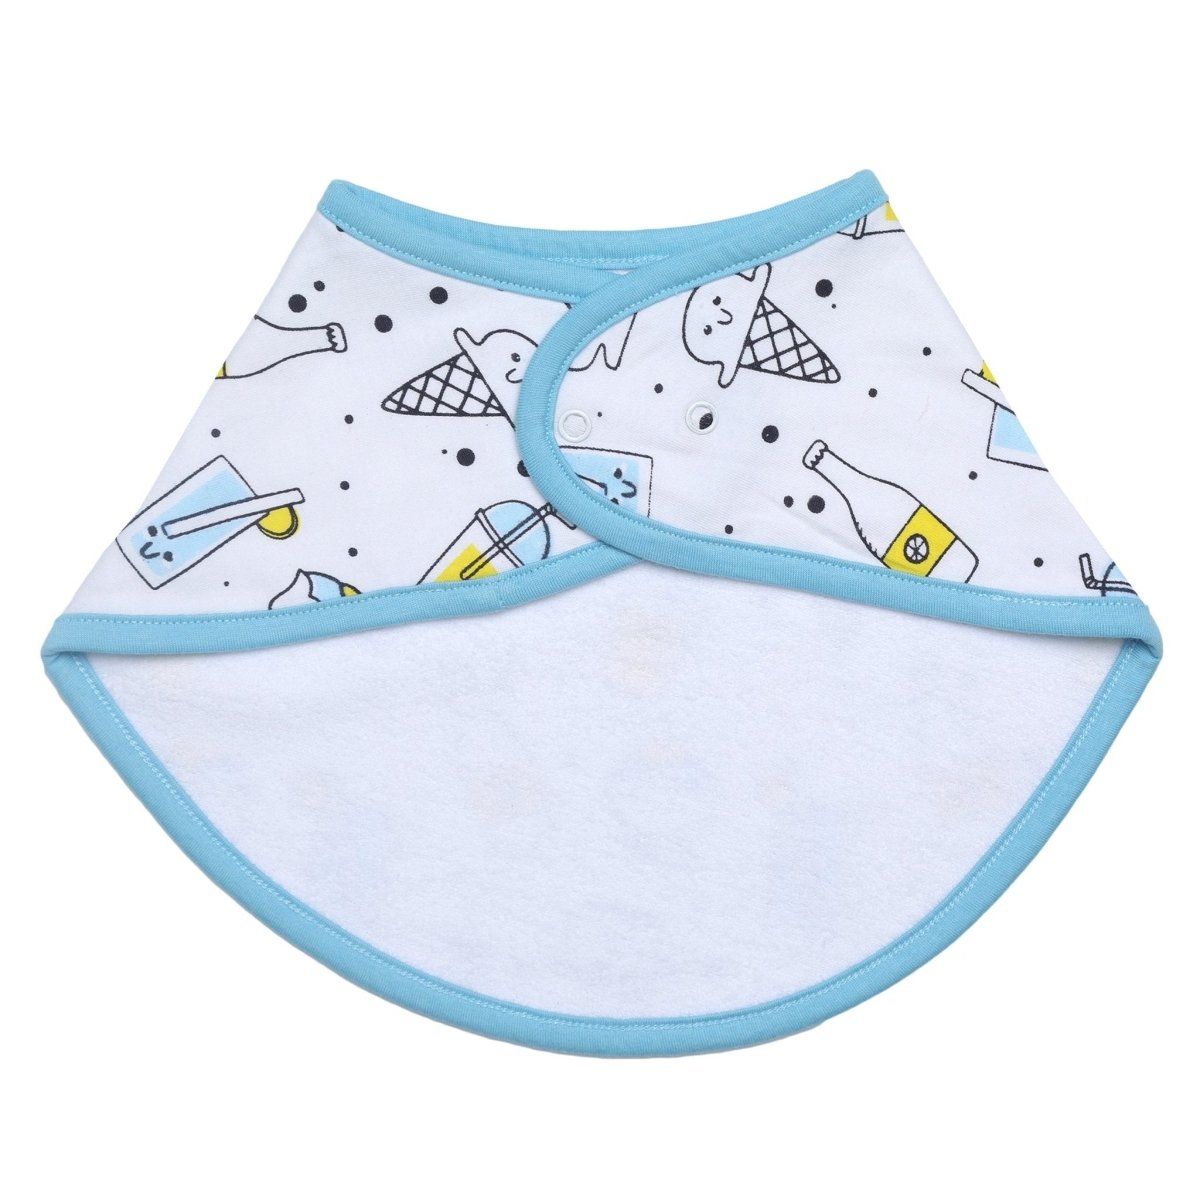 Combo of Tall As A Giraffe And My Smoothie Feeding Bibs- (Pack of 2) - FEDB2-MP-TGMYS